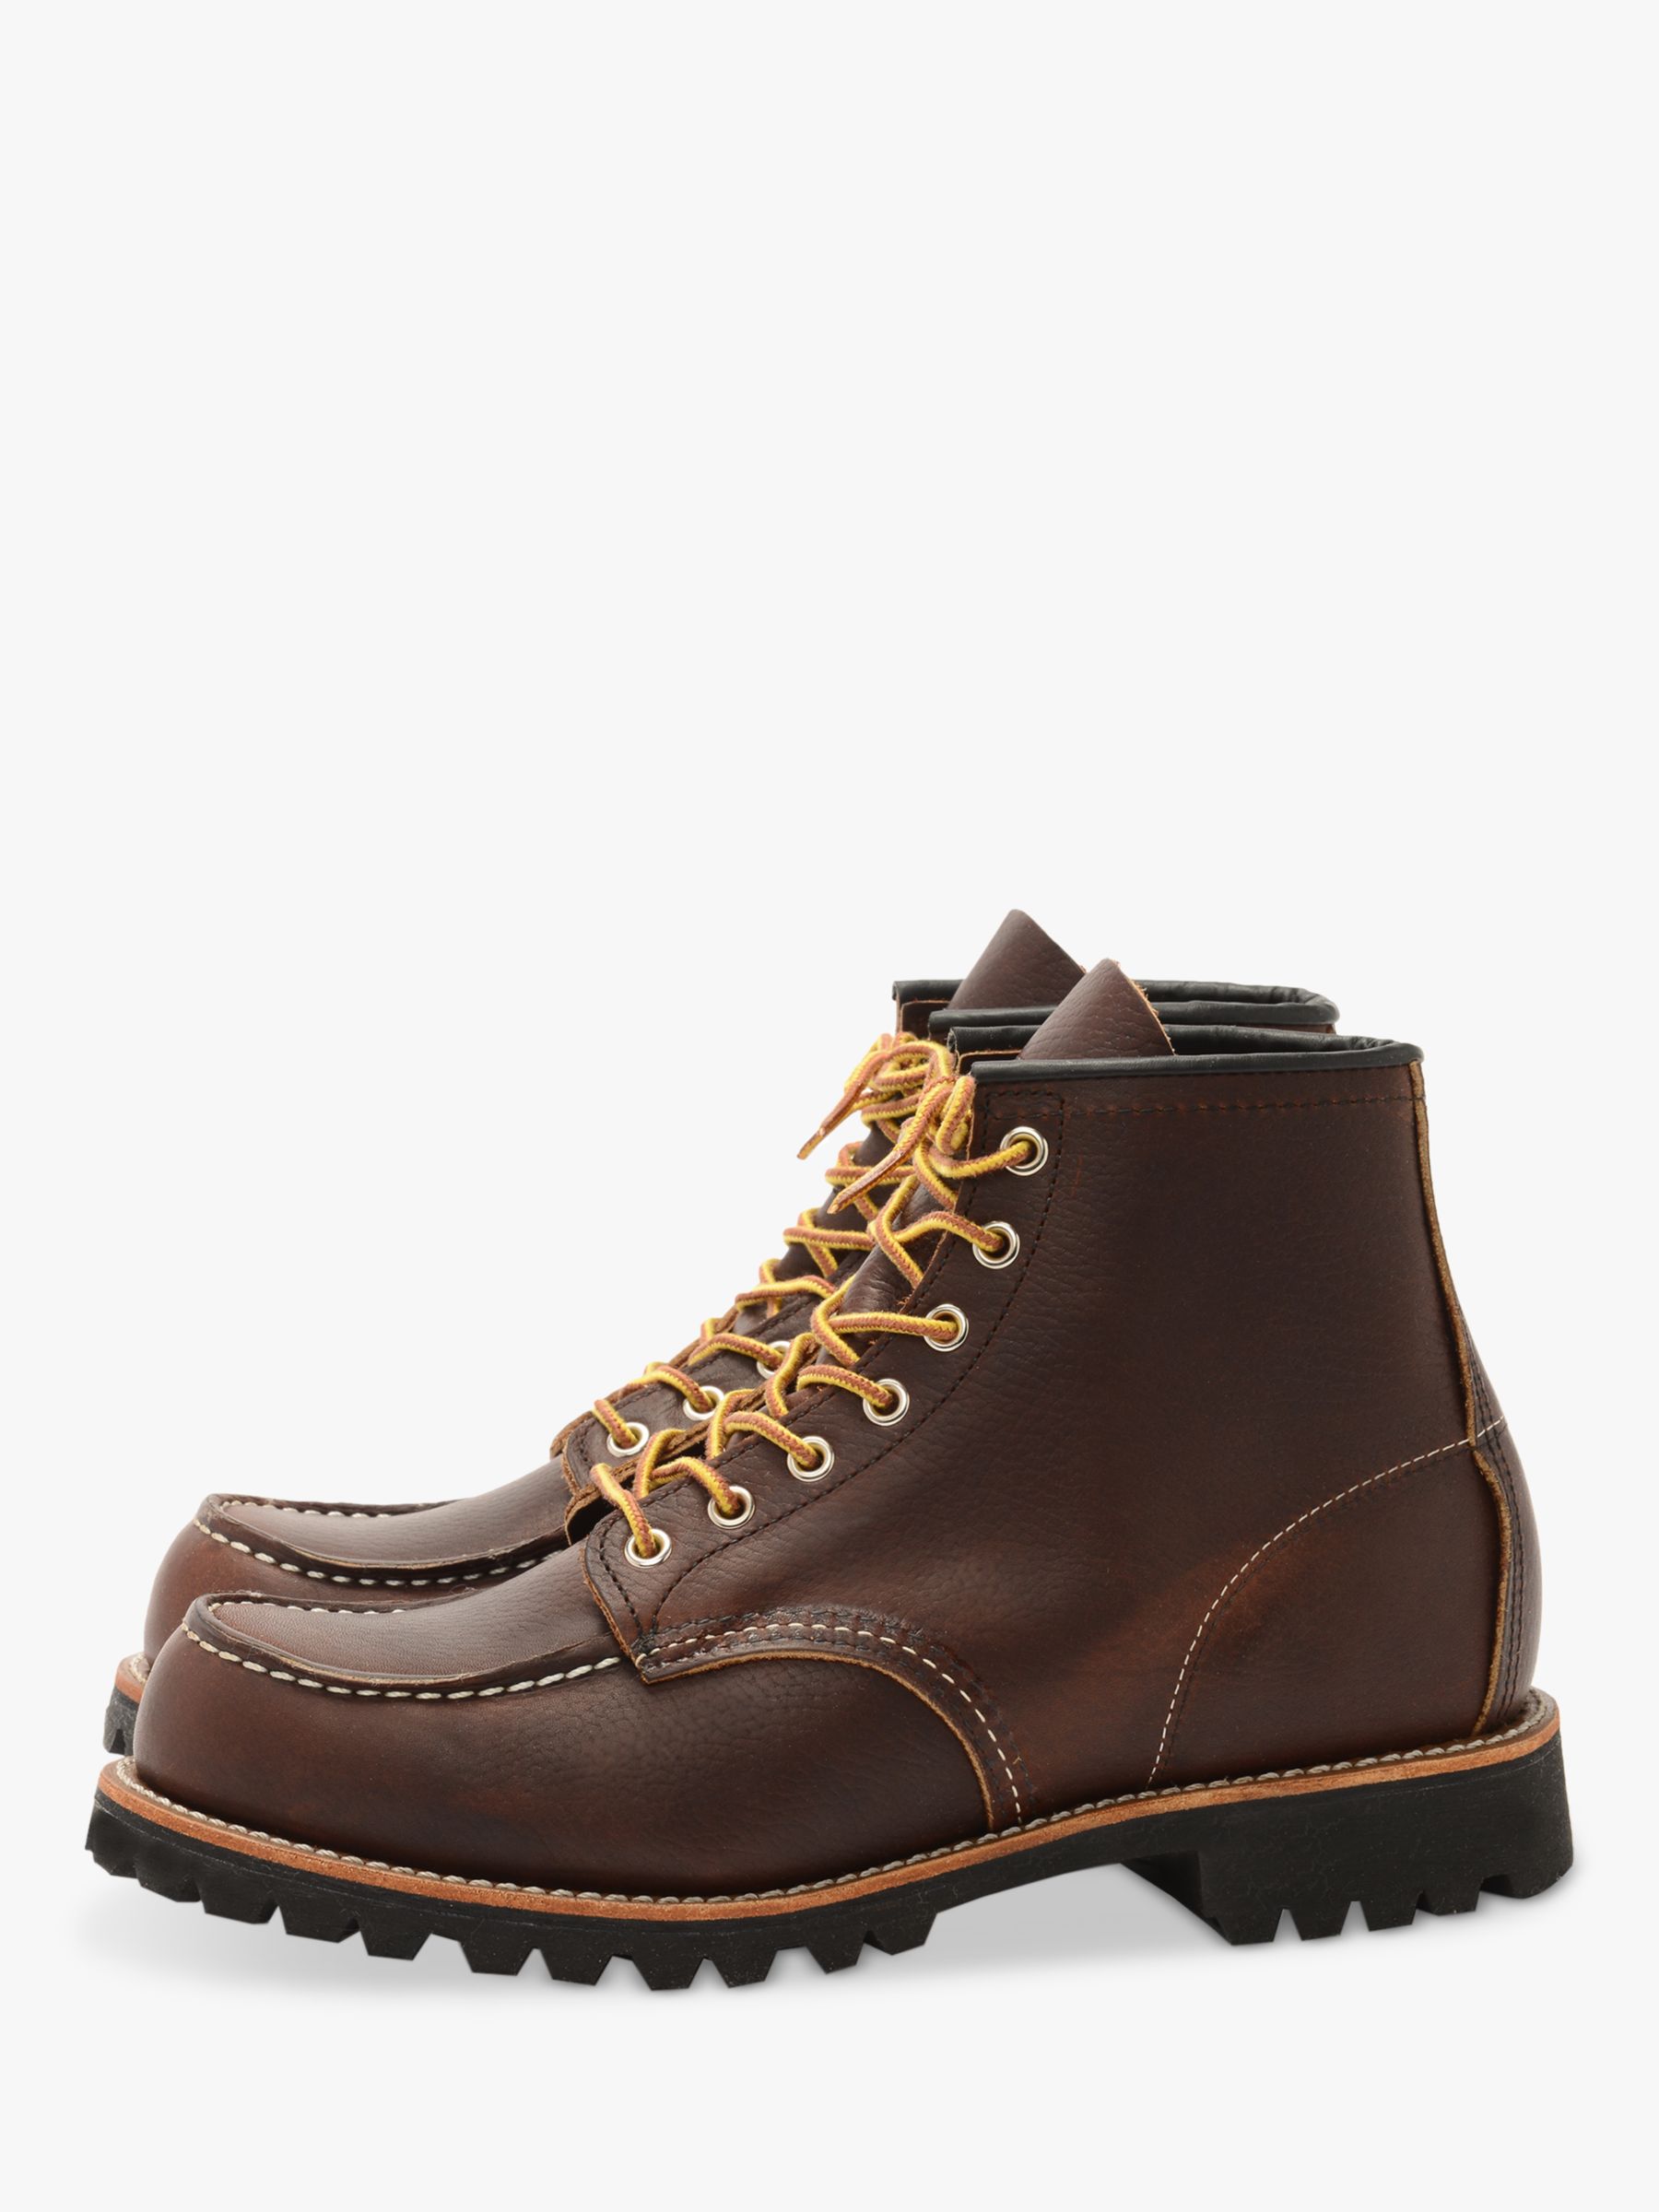 Red Wing Roughneck Moc Toe Briar Oil Slick Leather Boots, Brown